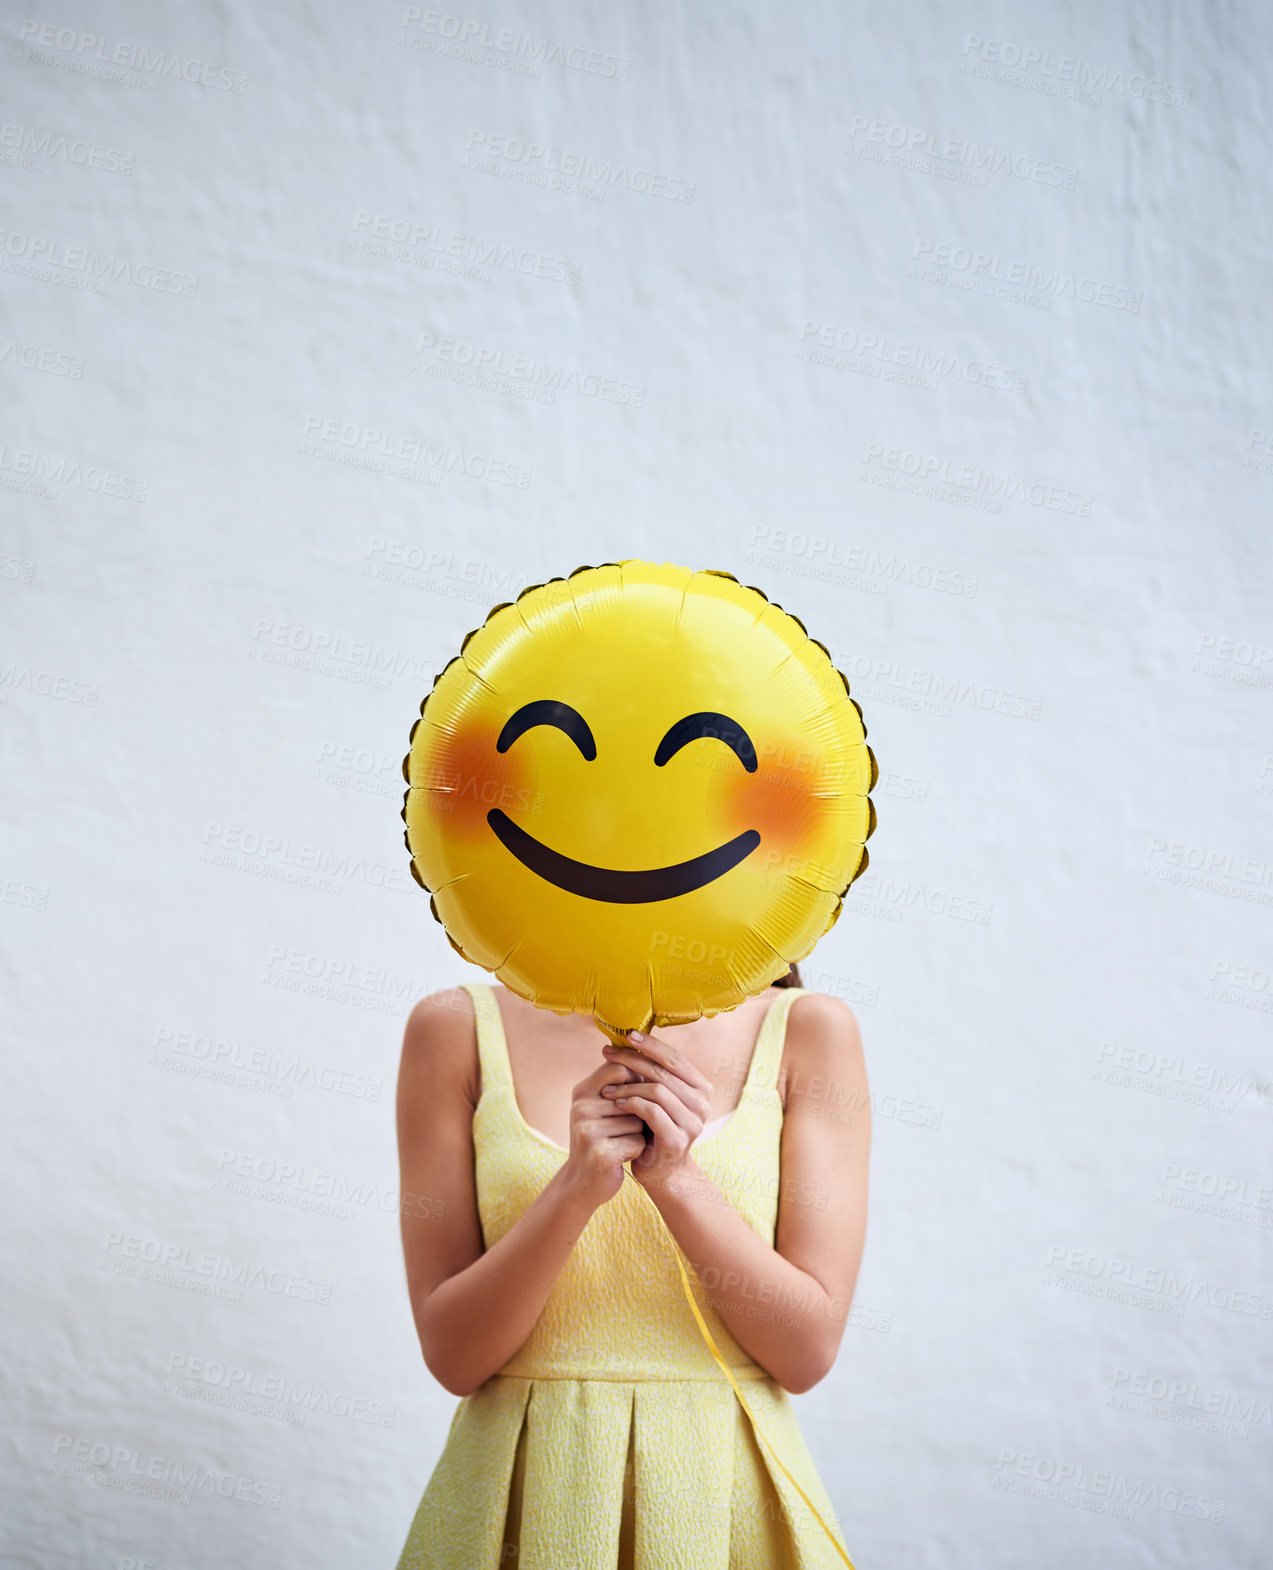 Buy stock photo Studio shot of an unrecognizable woman holding a smiling emoticon balloon in front of her face against a grey background